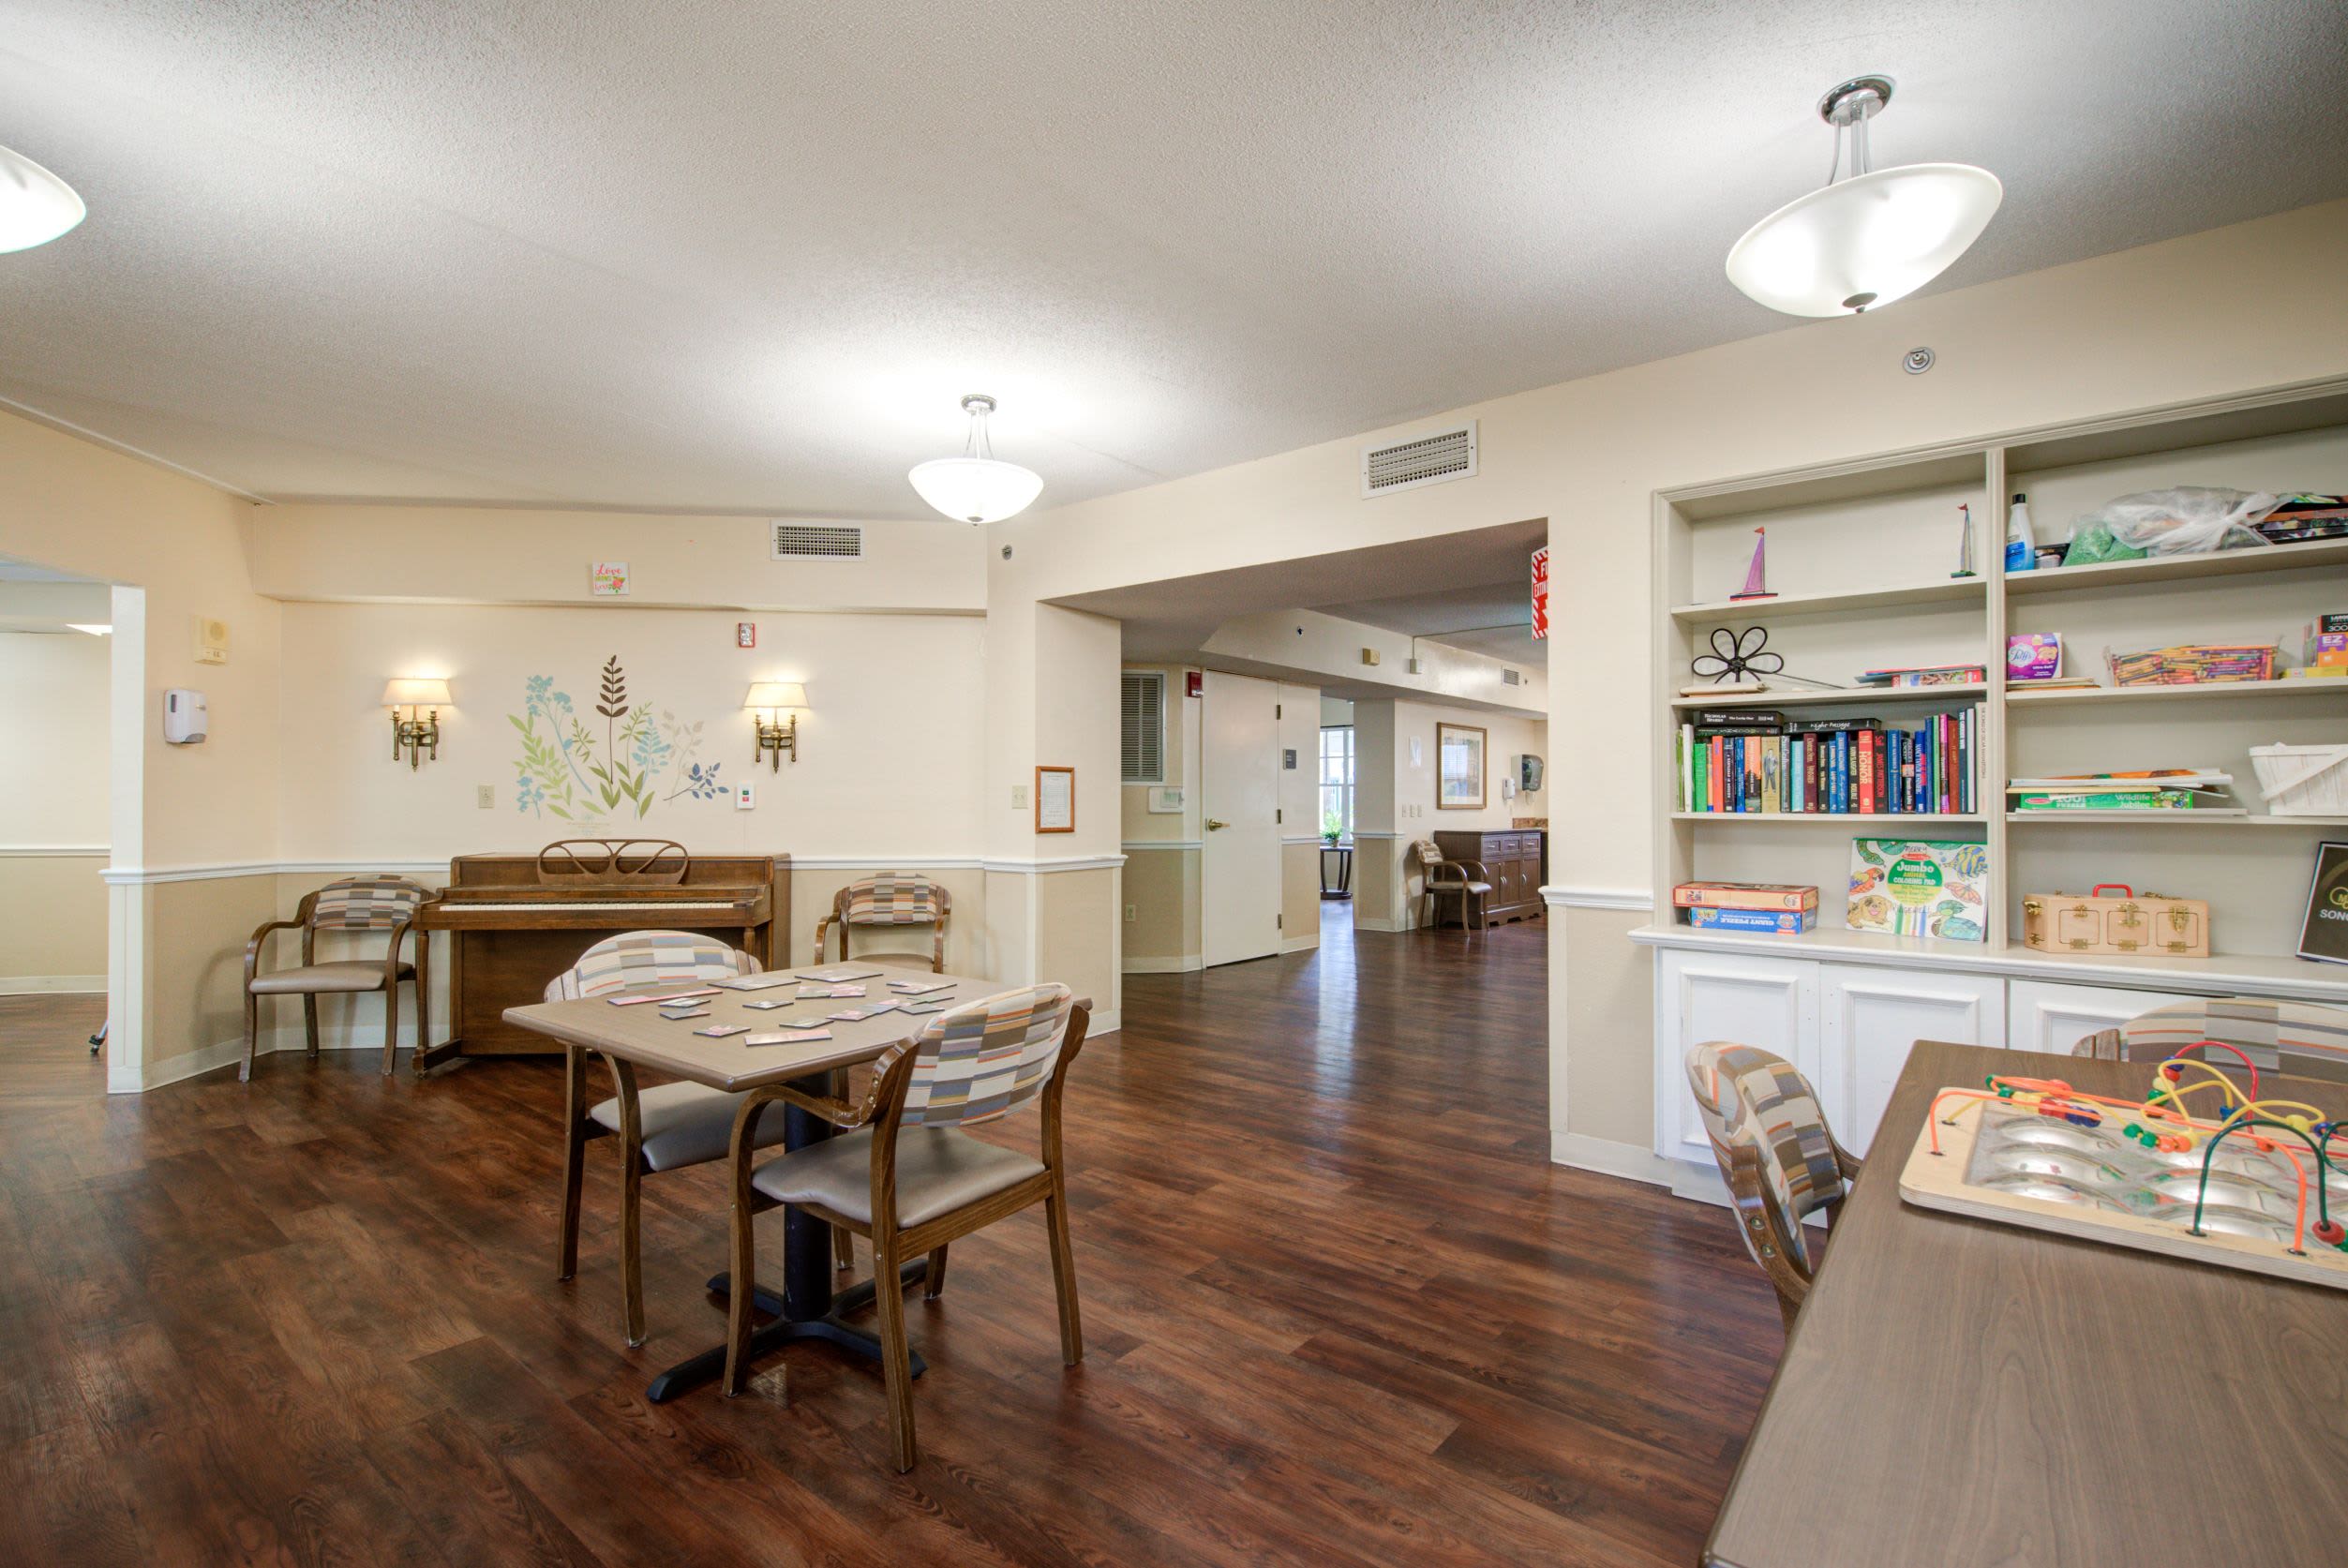 Community library area at Truewood by Merrill, Charlotte Center in Port Charlotte, Florida.